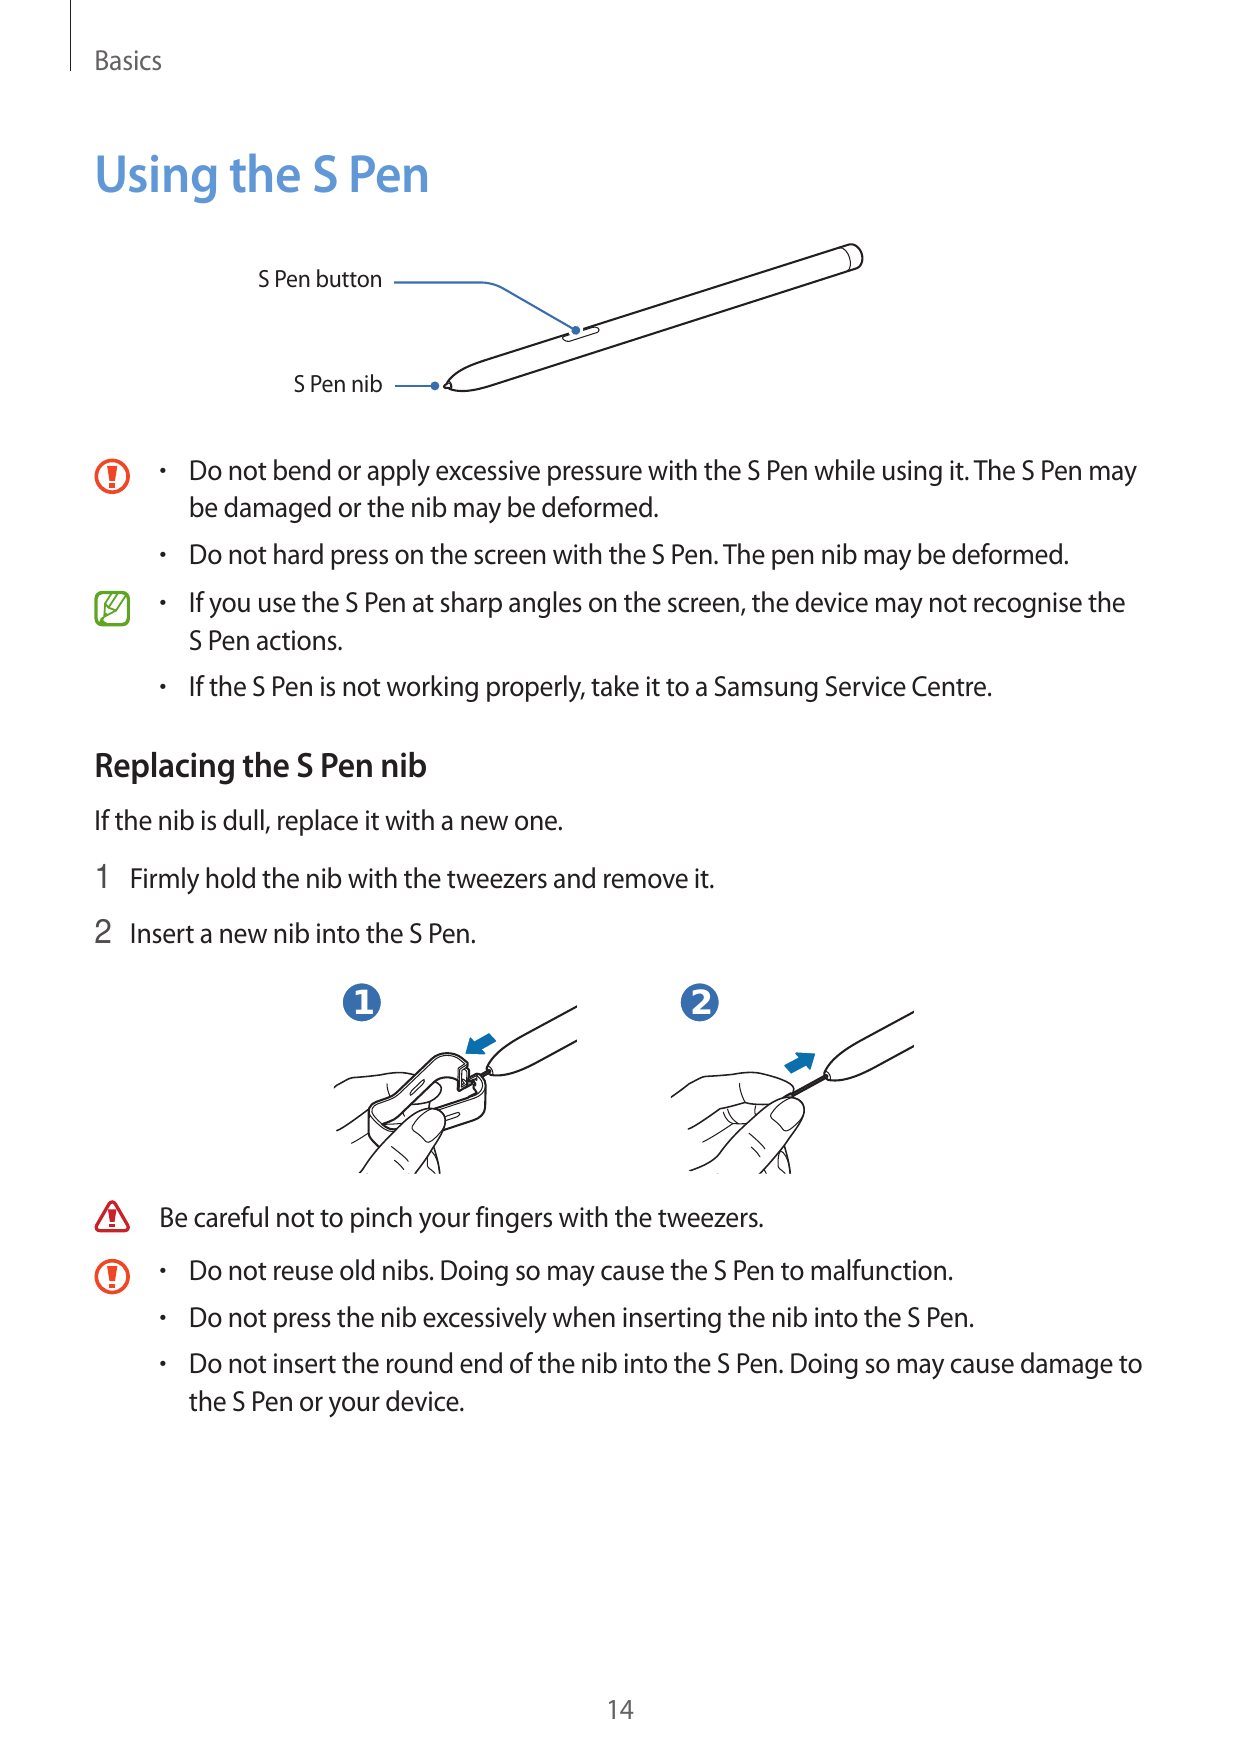 BasicsUsing the S PenS Pen buttonS Pen nib• Do not bend or apply excessive pressure with the S Pen while using it. The S Pen may